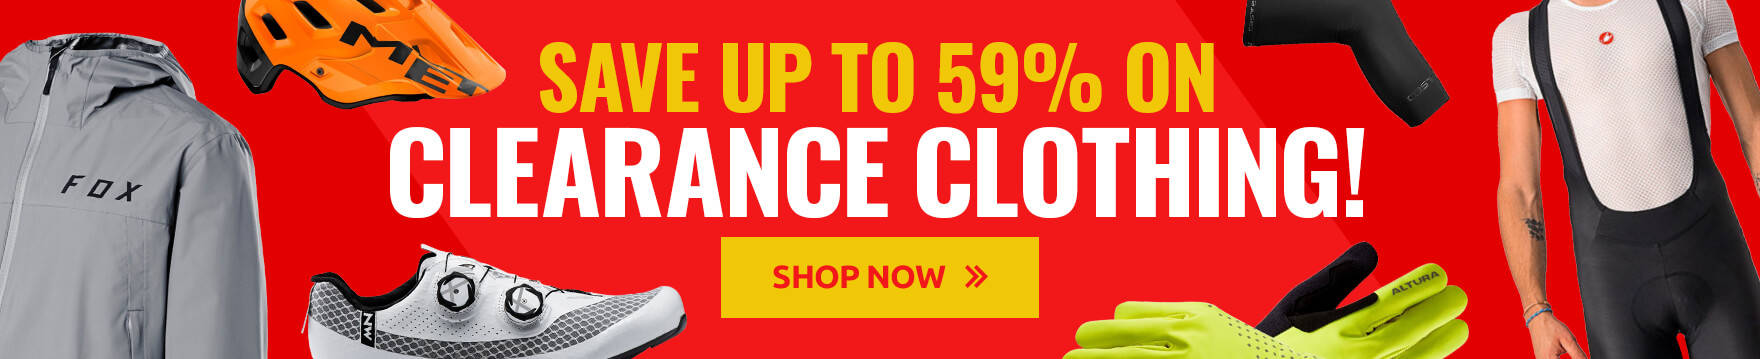 Save on clearance clothing!